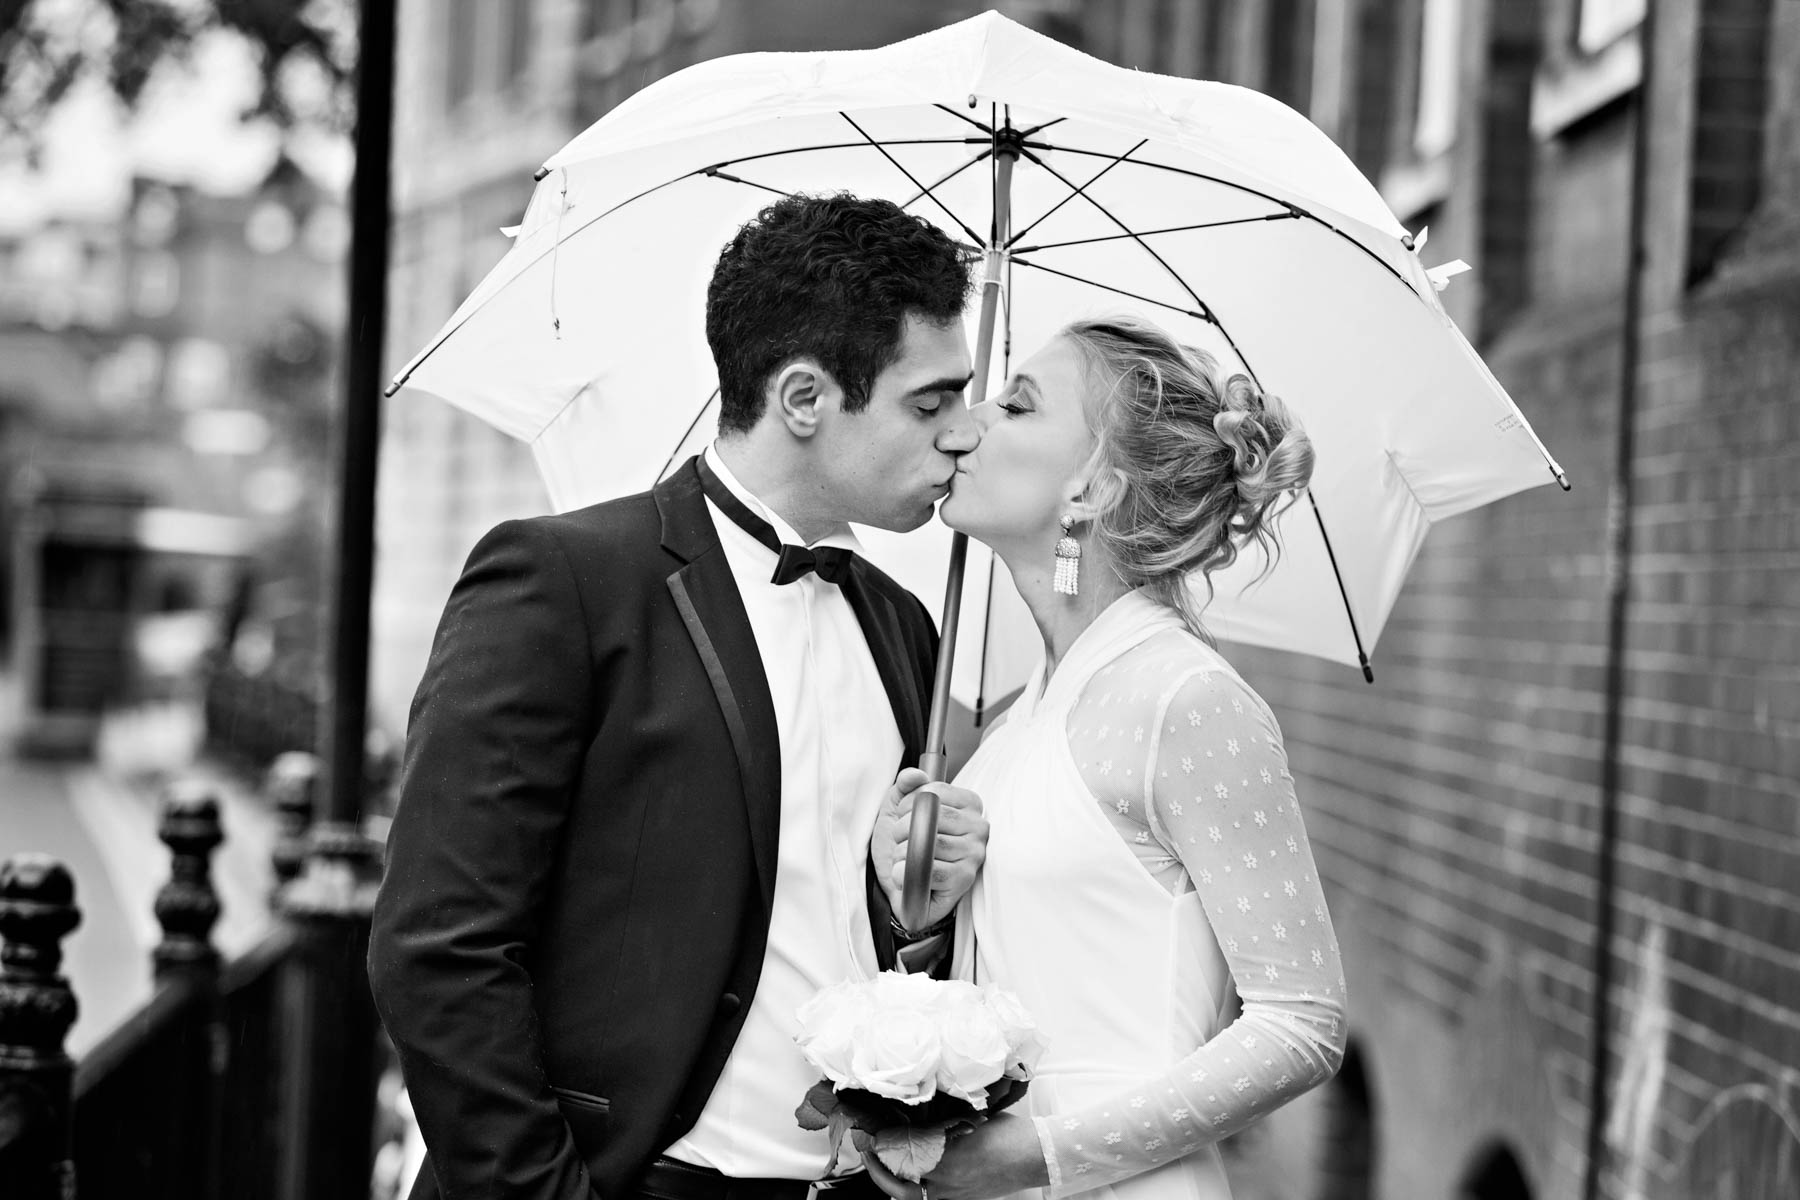 A black and white image of a bride and groom kissing under a white umbrella.